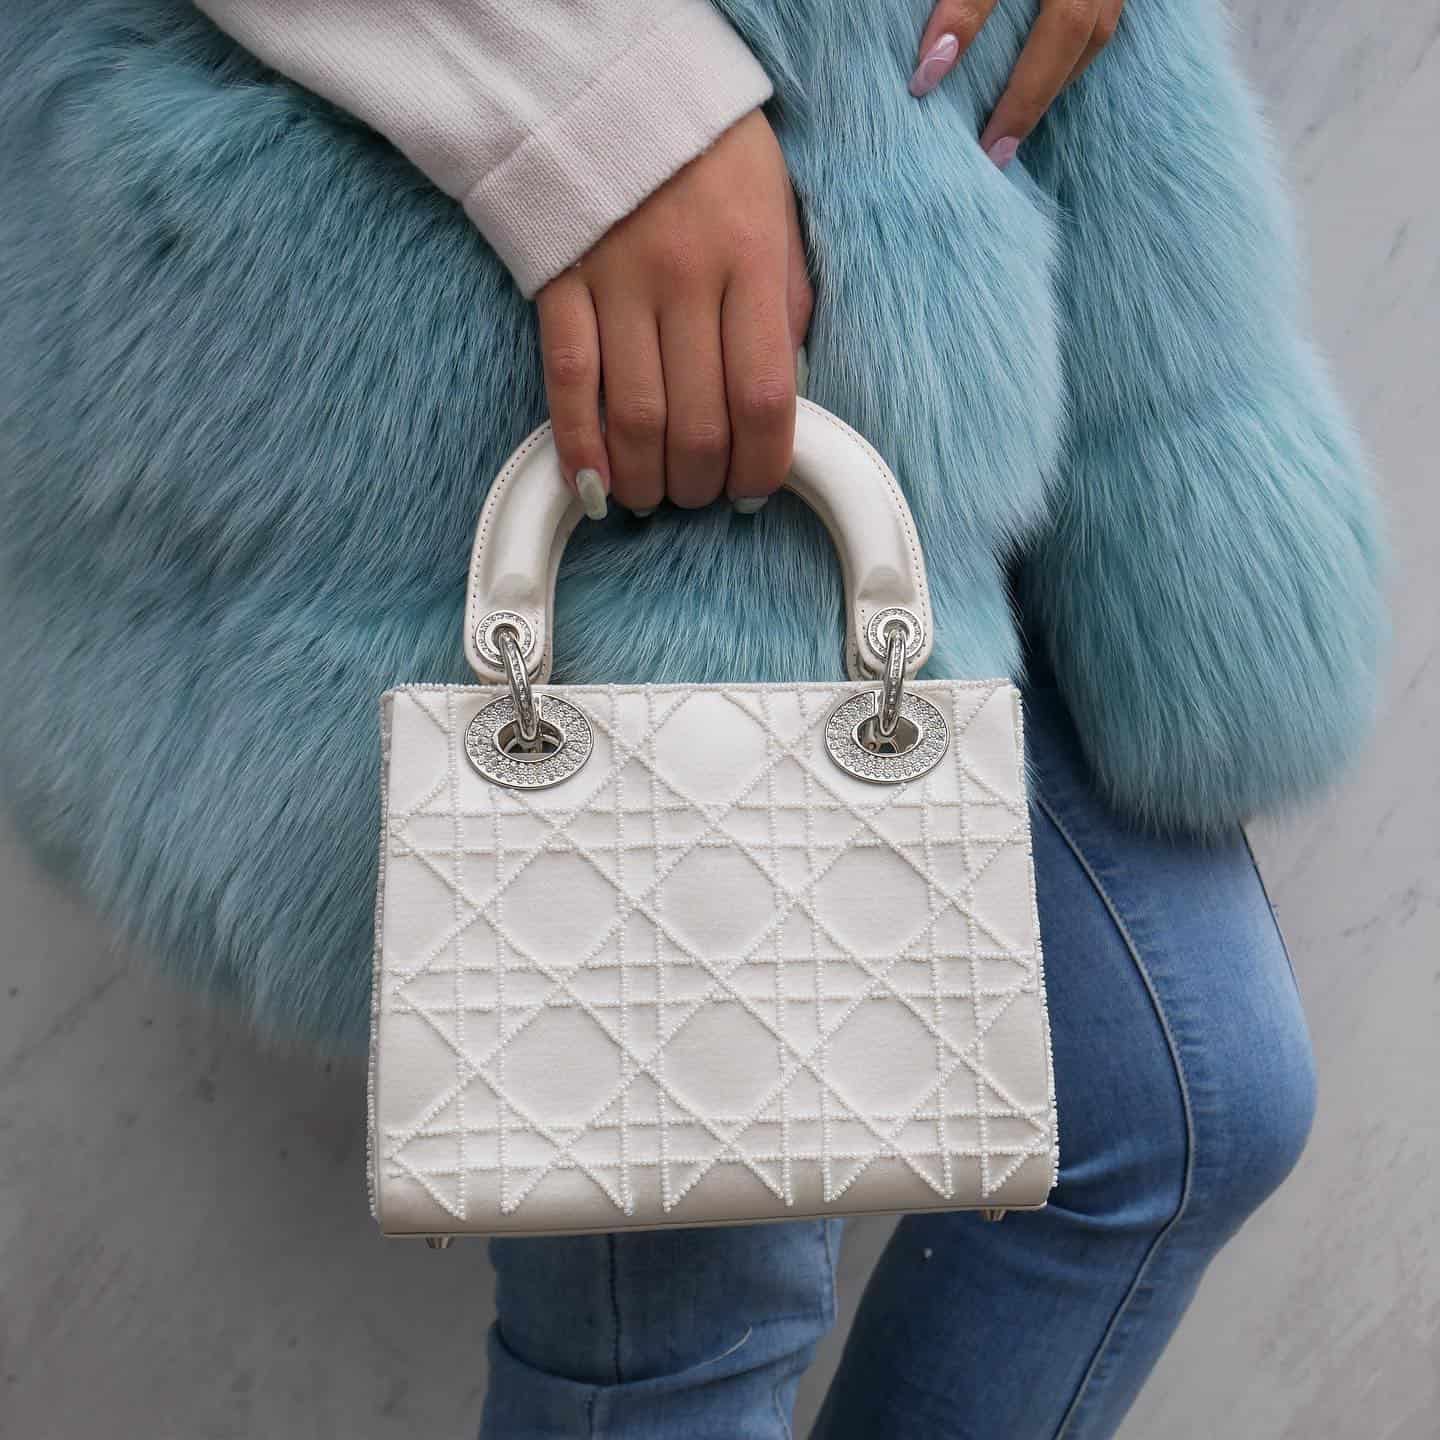 Closeup of a limited edition white lady dior bag